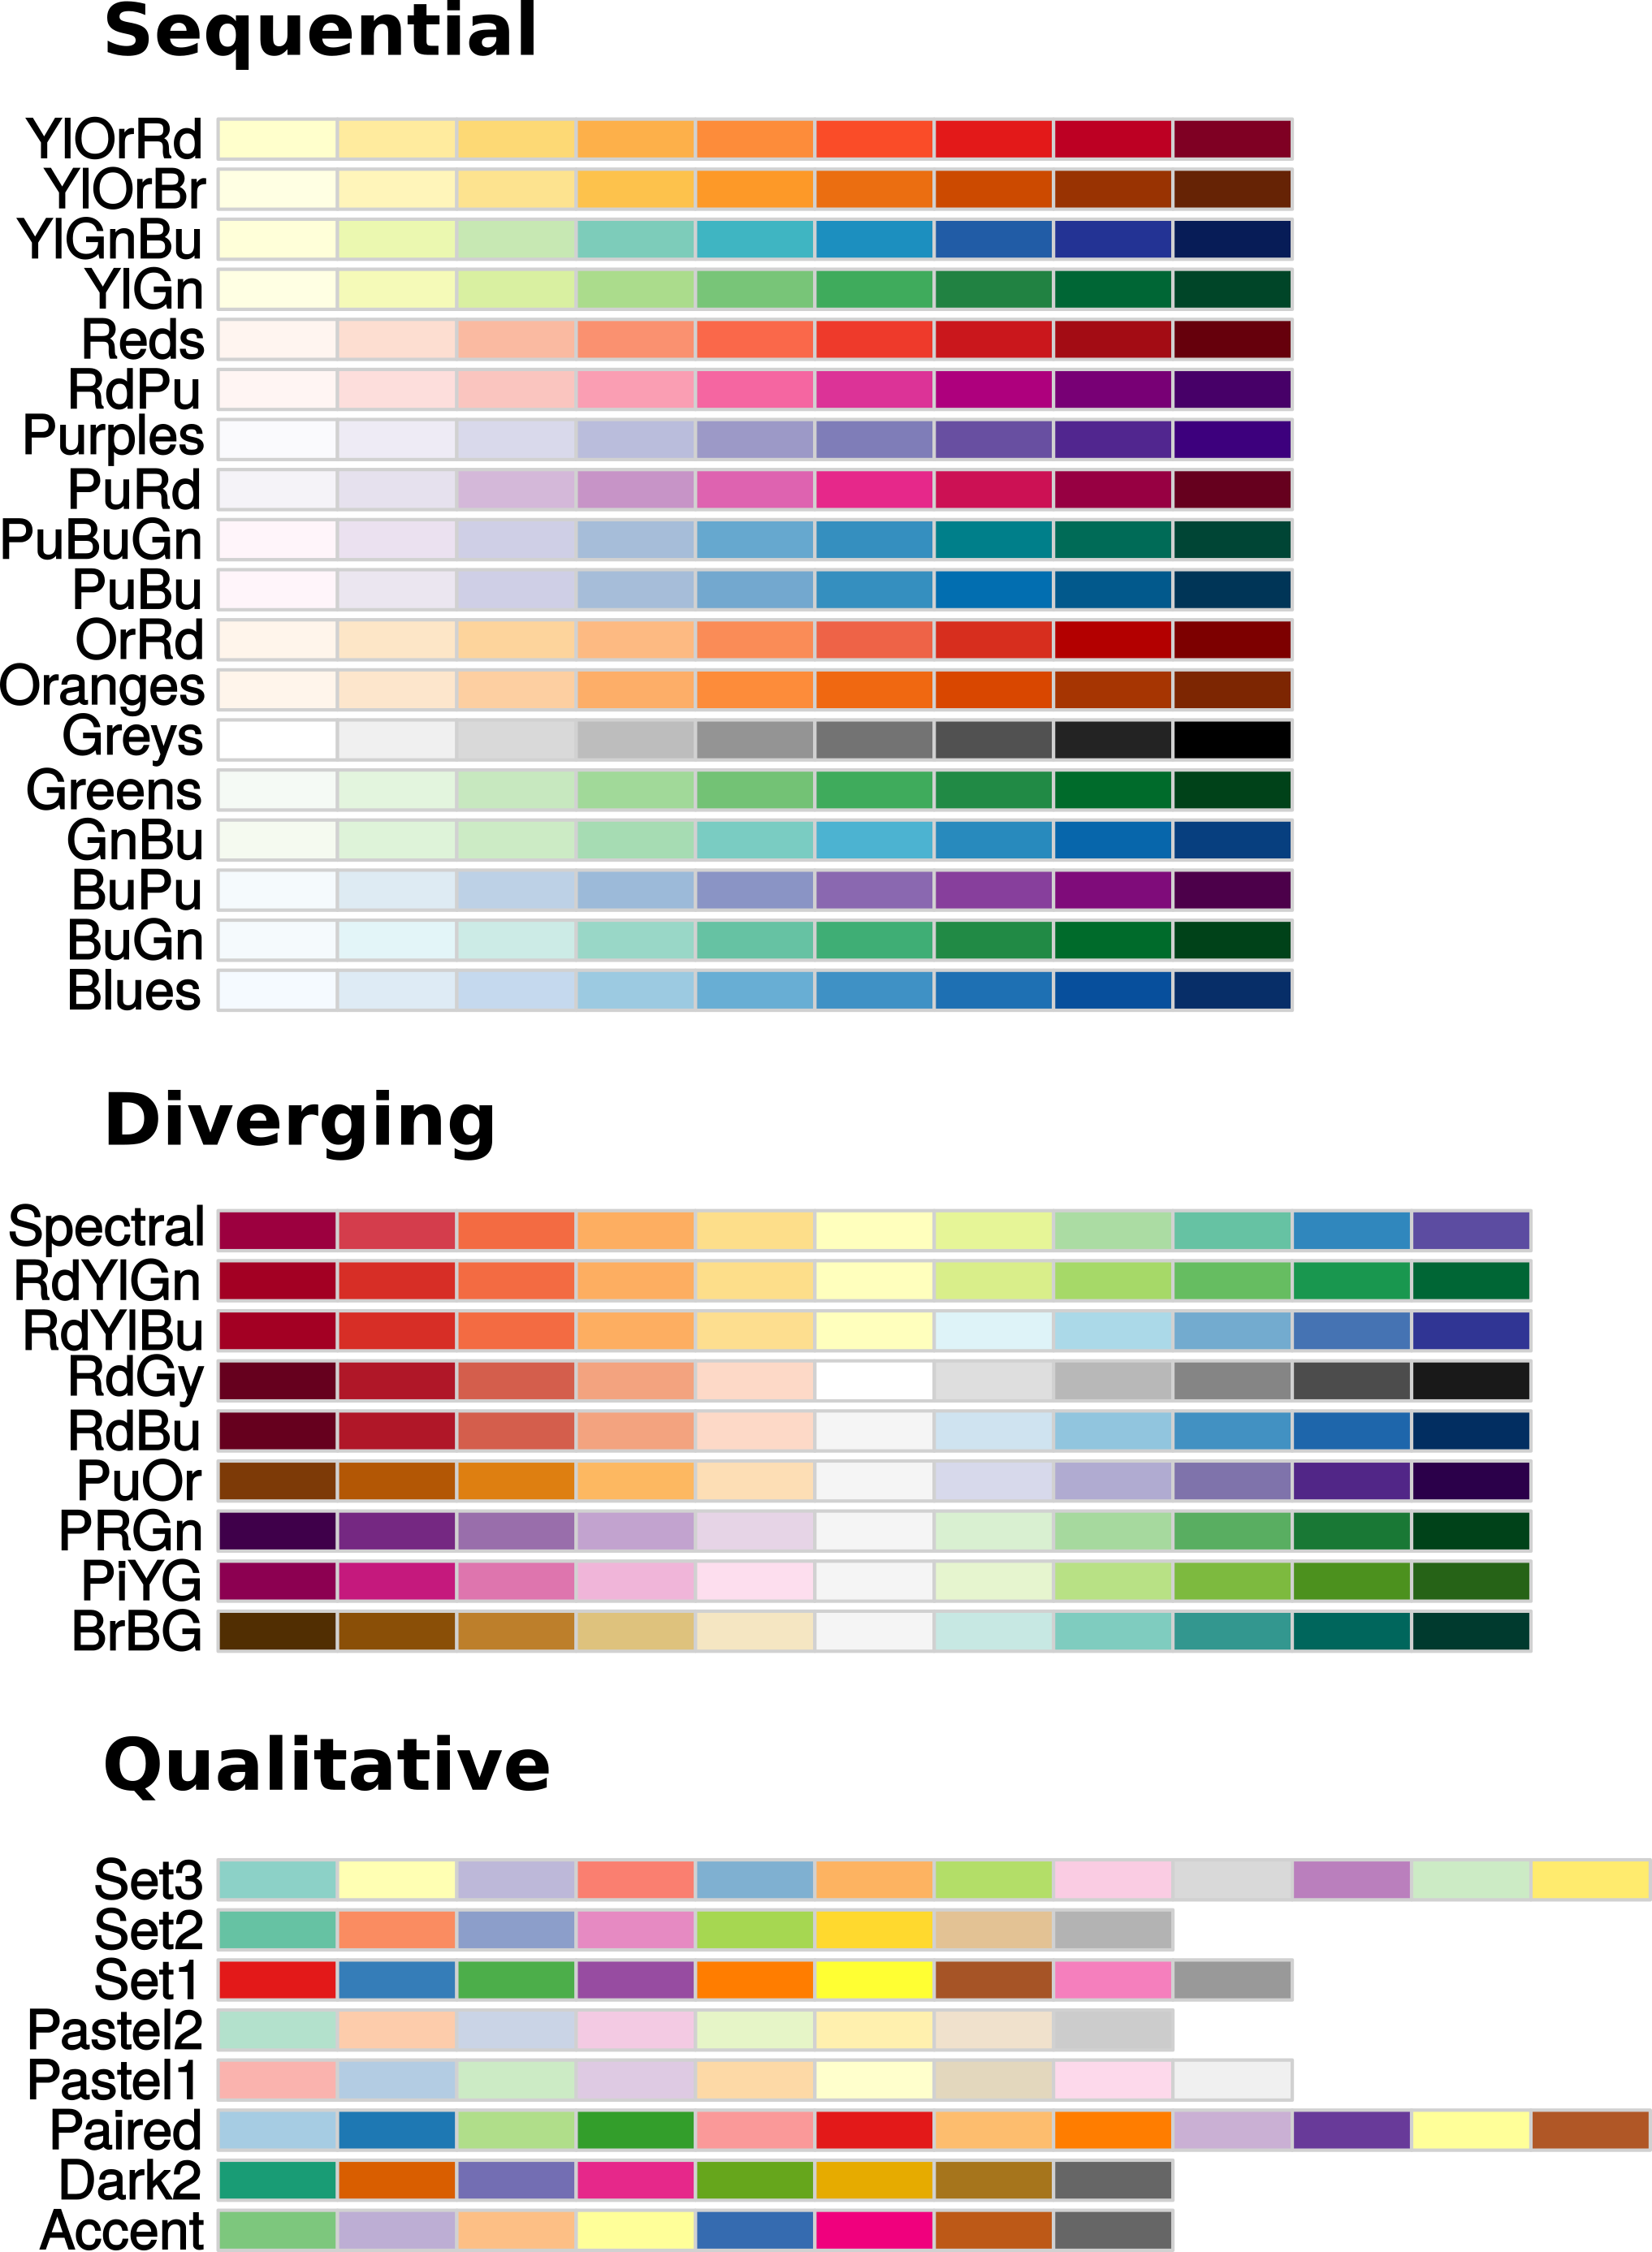 Sequential, diverging and qualitative ColorBrewer scales, using the maximal number of colors available in each scale